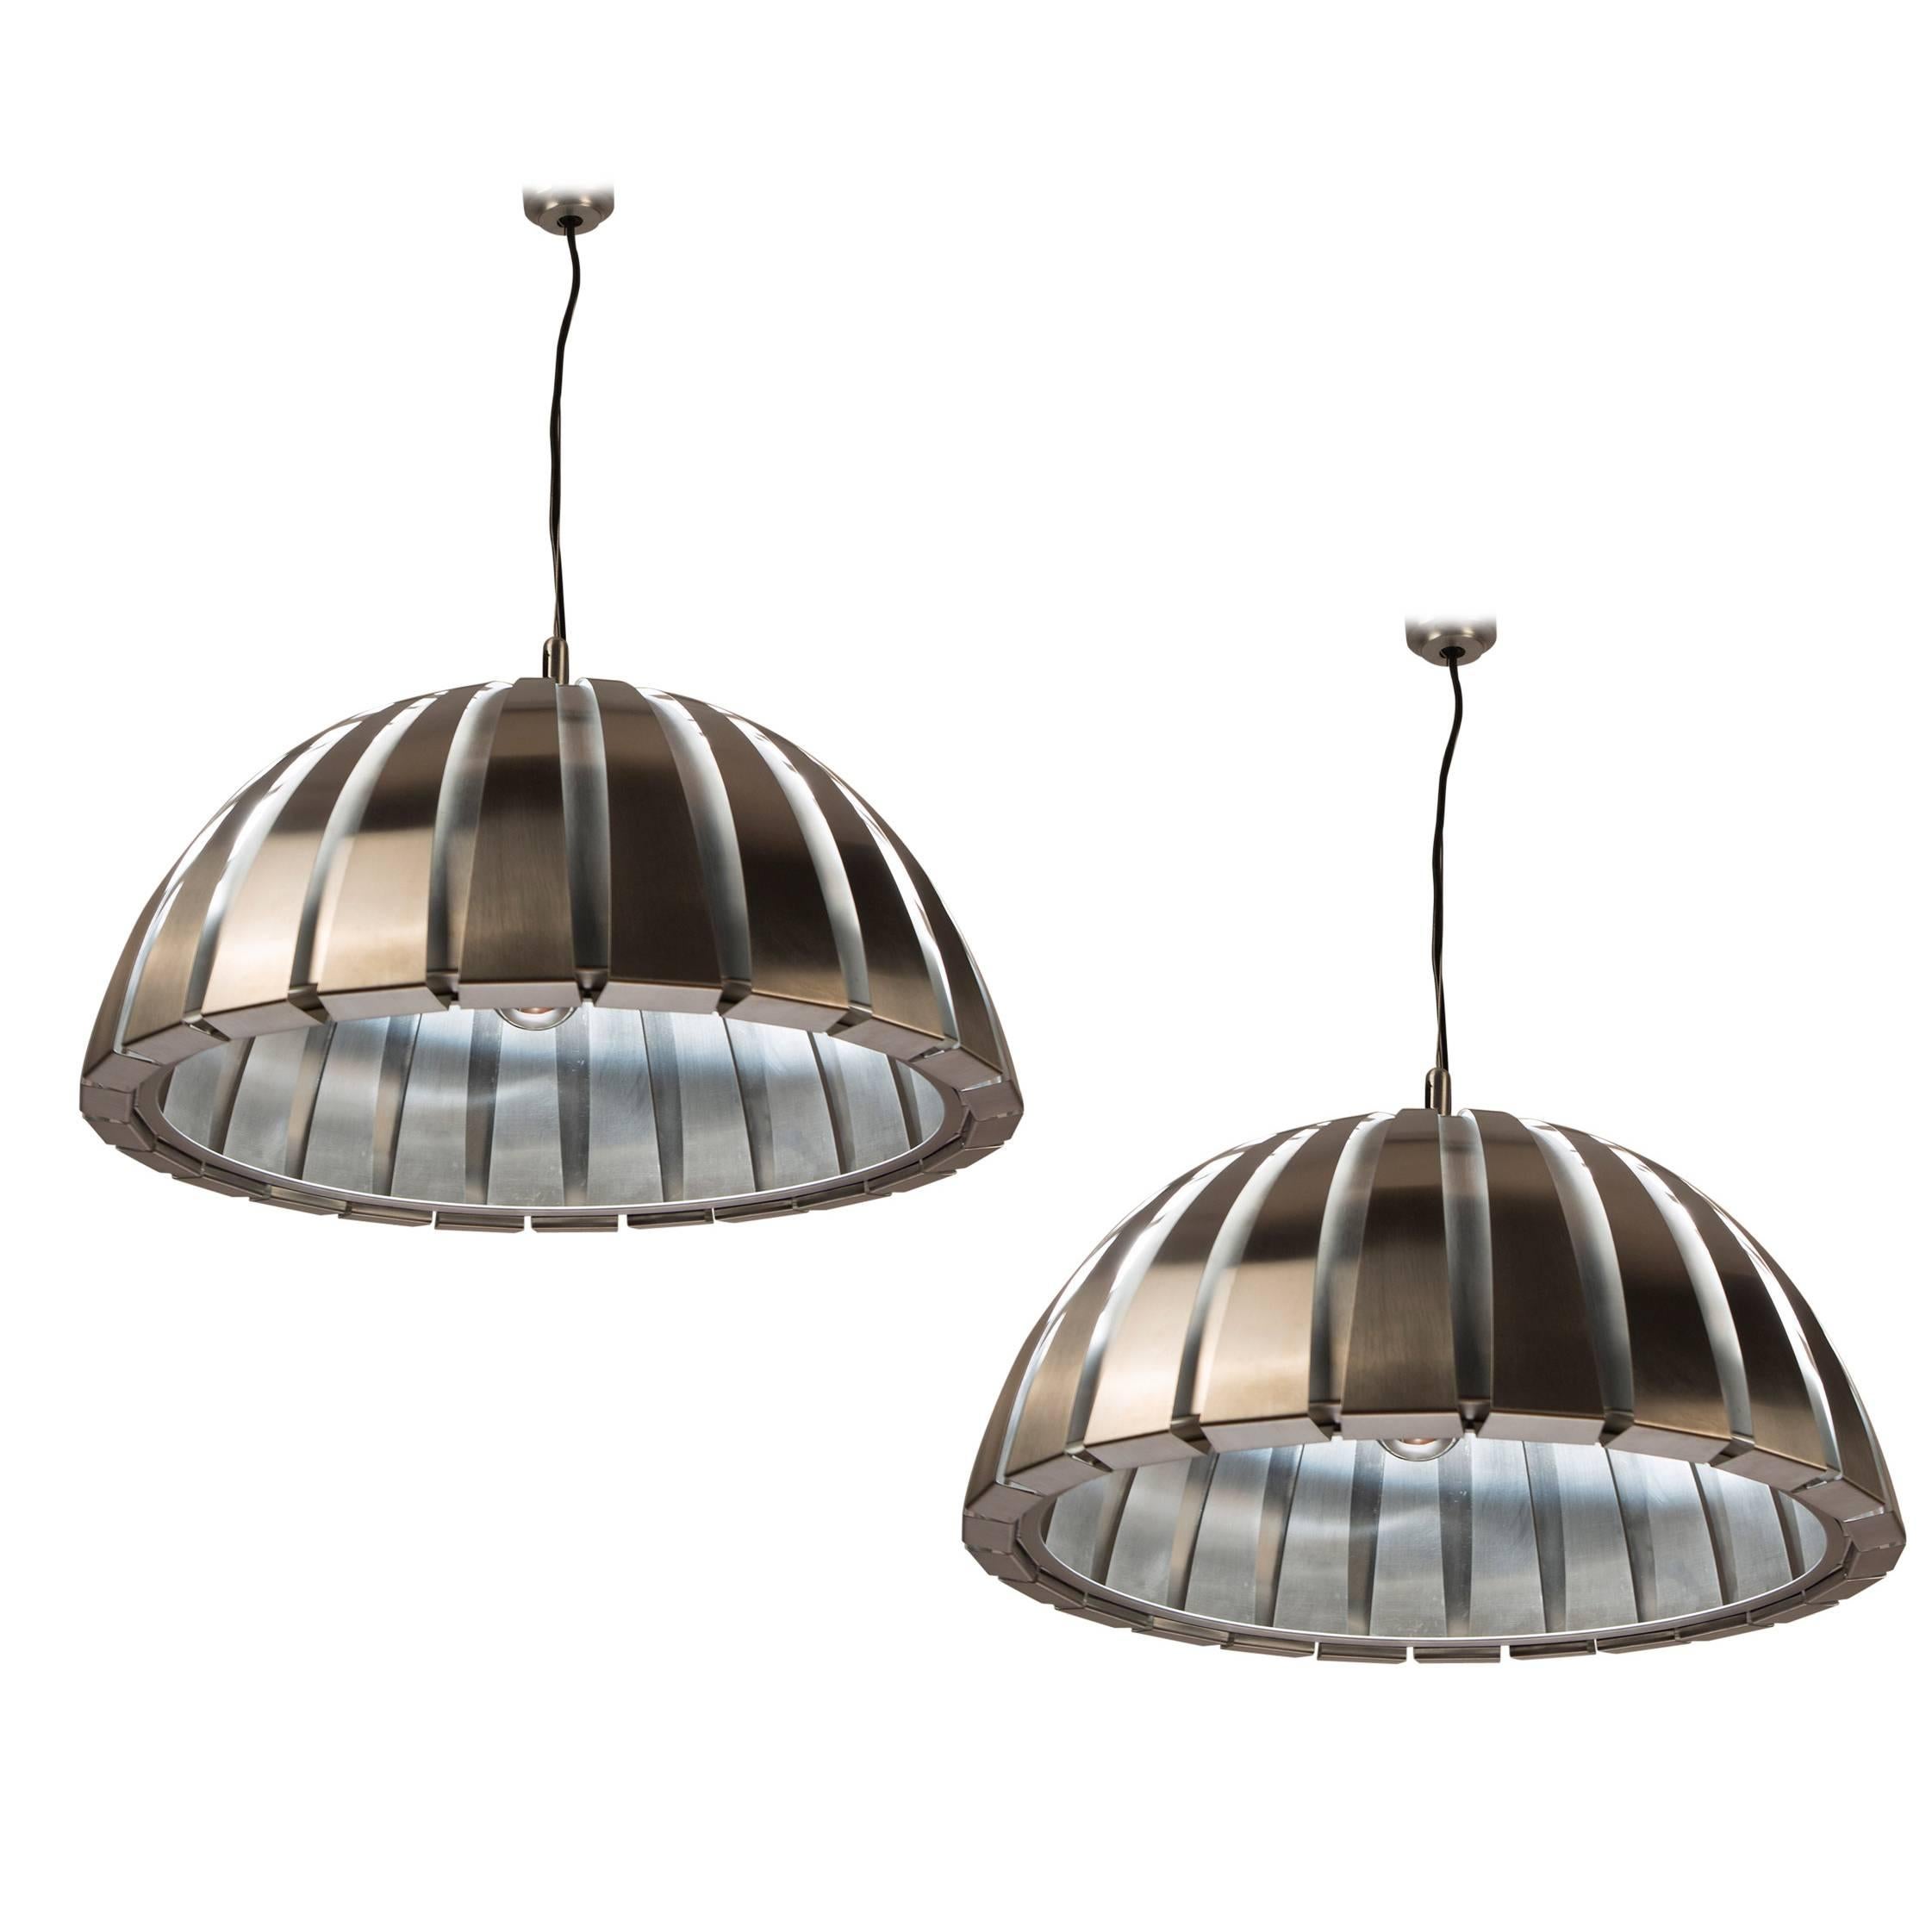 Set of Two Steel Ceiling Lamps by Elio Martinelli for Martinelli, Italy, 1960s For Sale